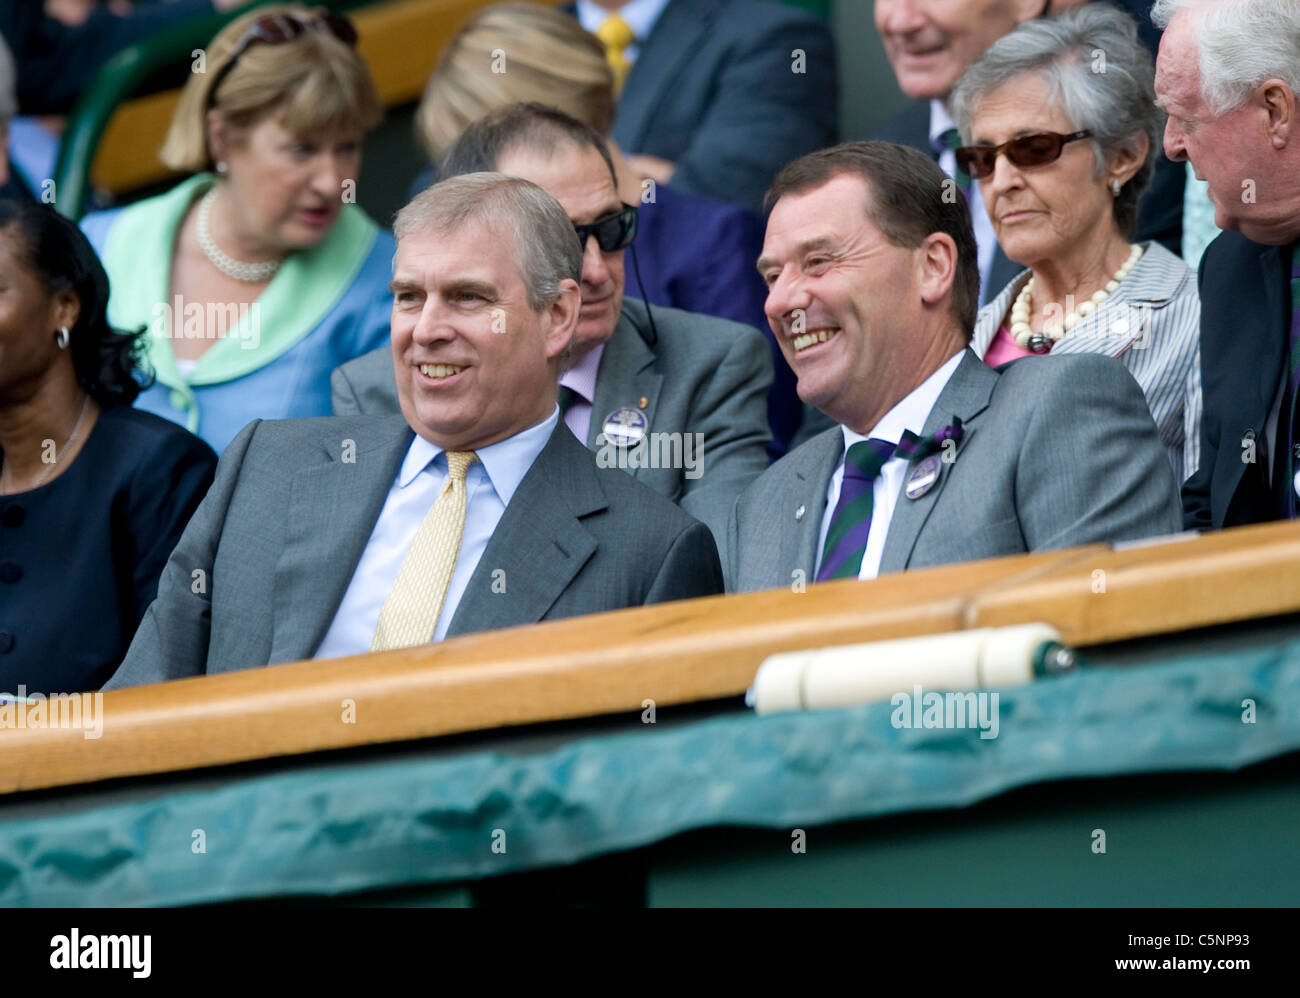 HRH Prince Andrew and Philip Brook in the Royal box during the Wimbledon Tennis Championships 2011 Stock Photo